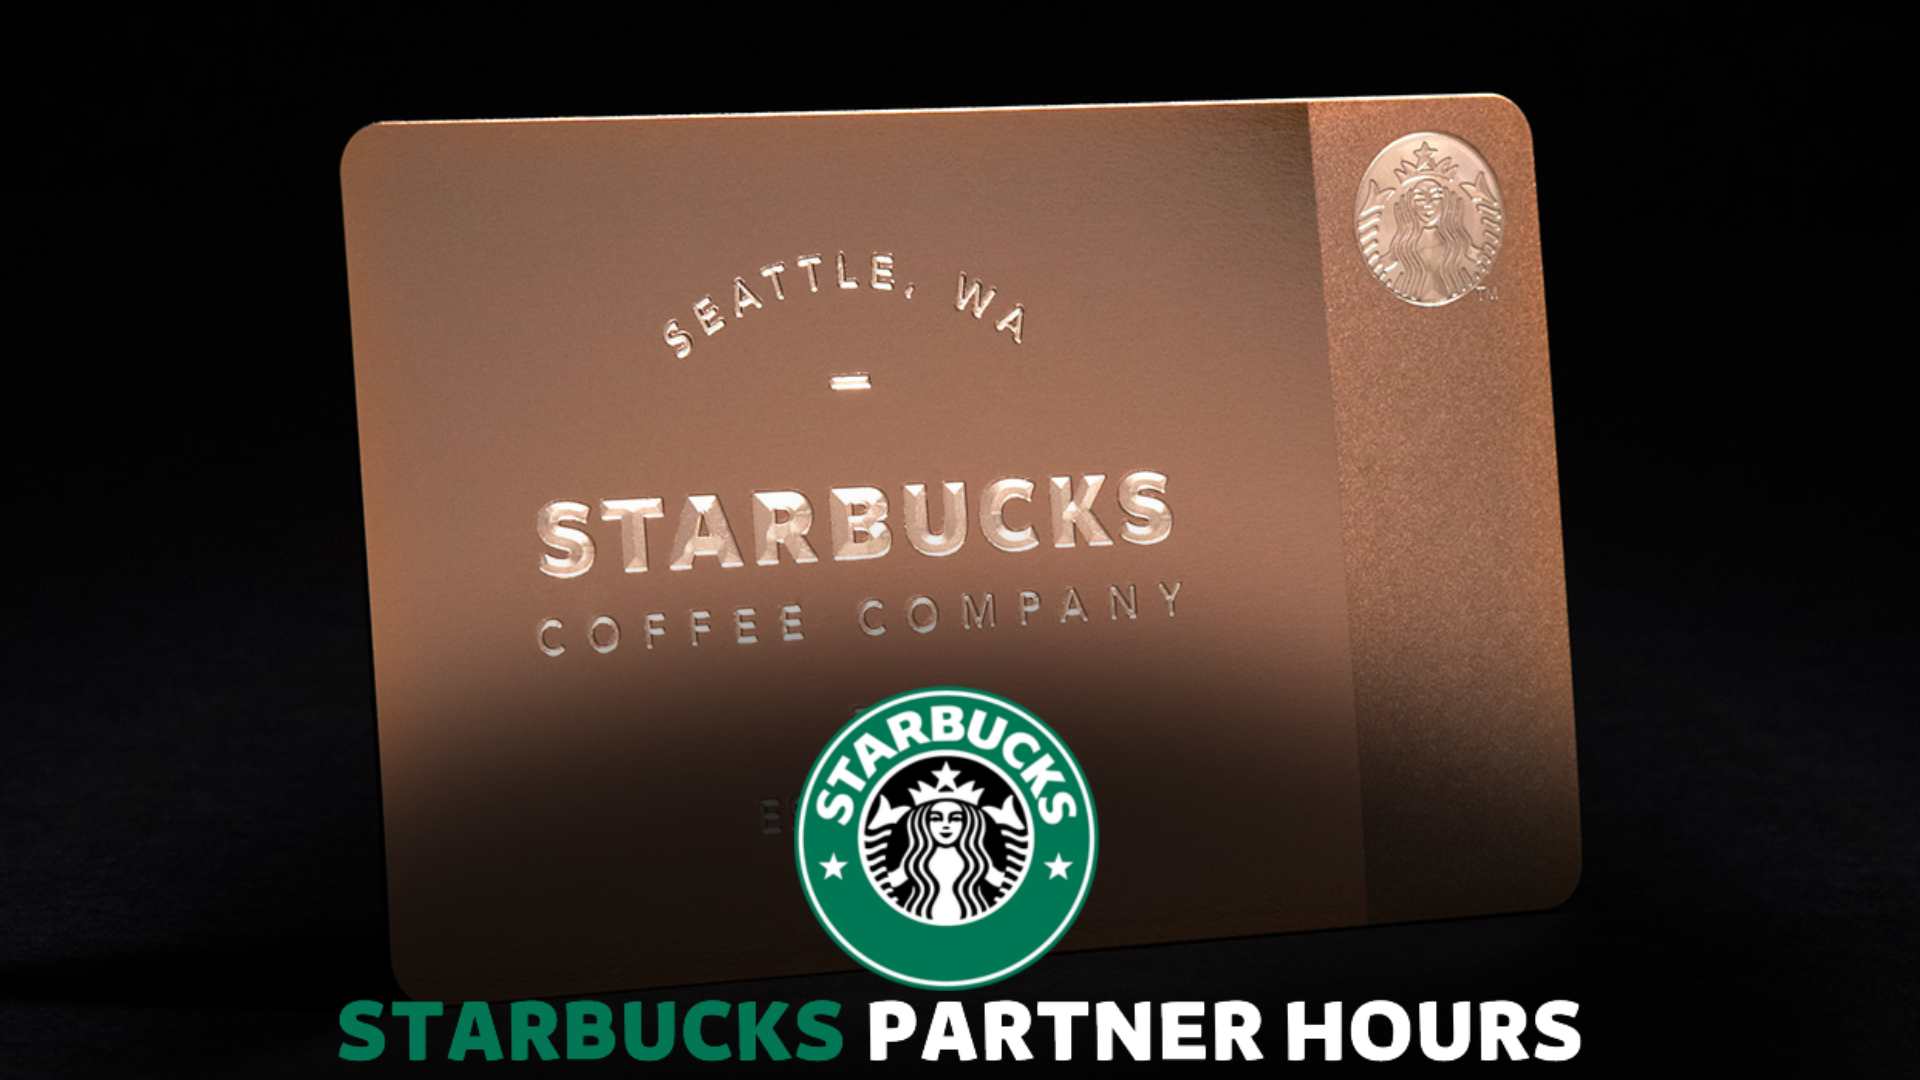 Can a Starbucks Partner Have a Gold Card